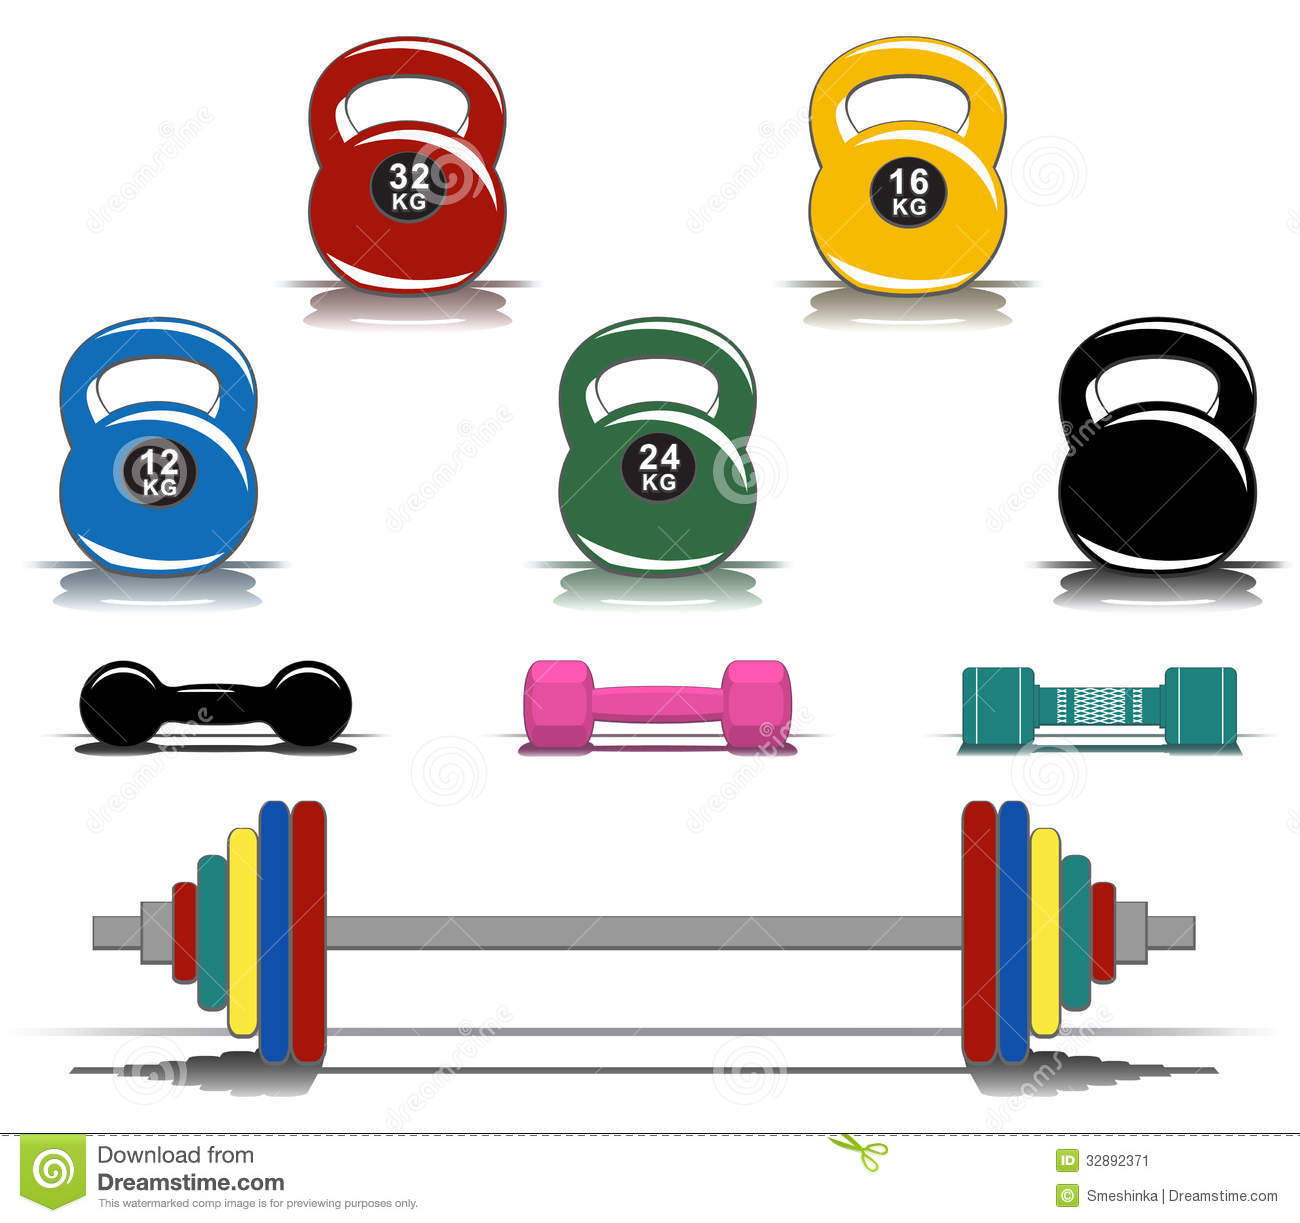 Colorful Fitness Equipment Stock Image   Image  32892371